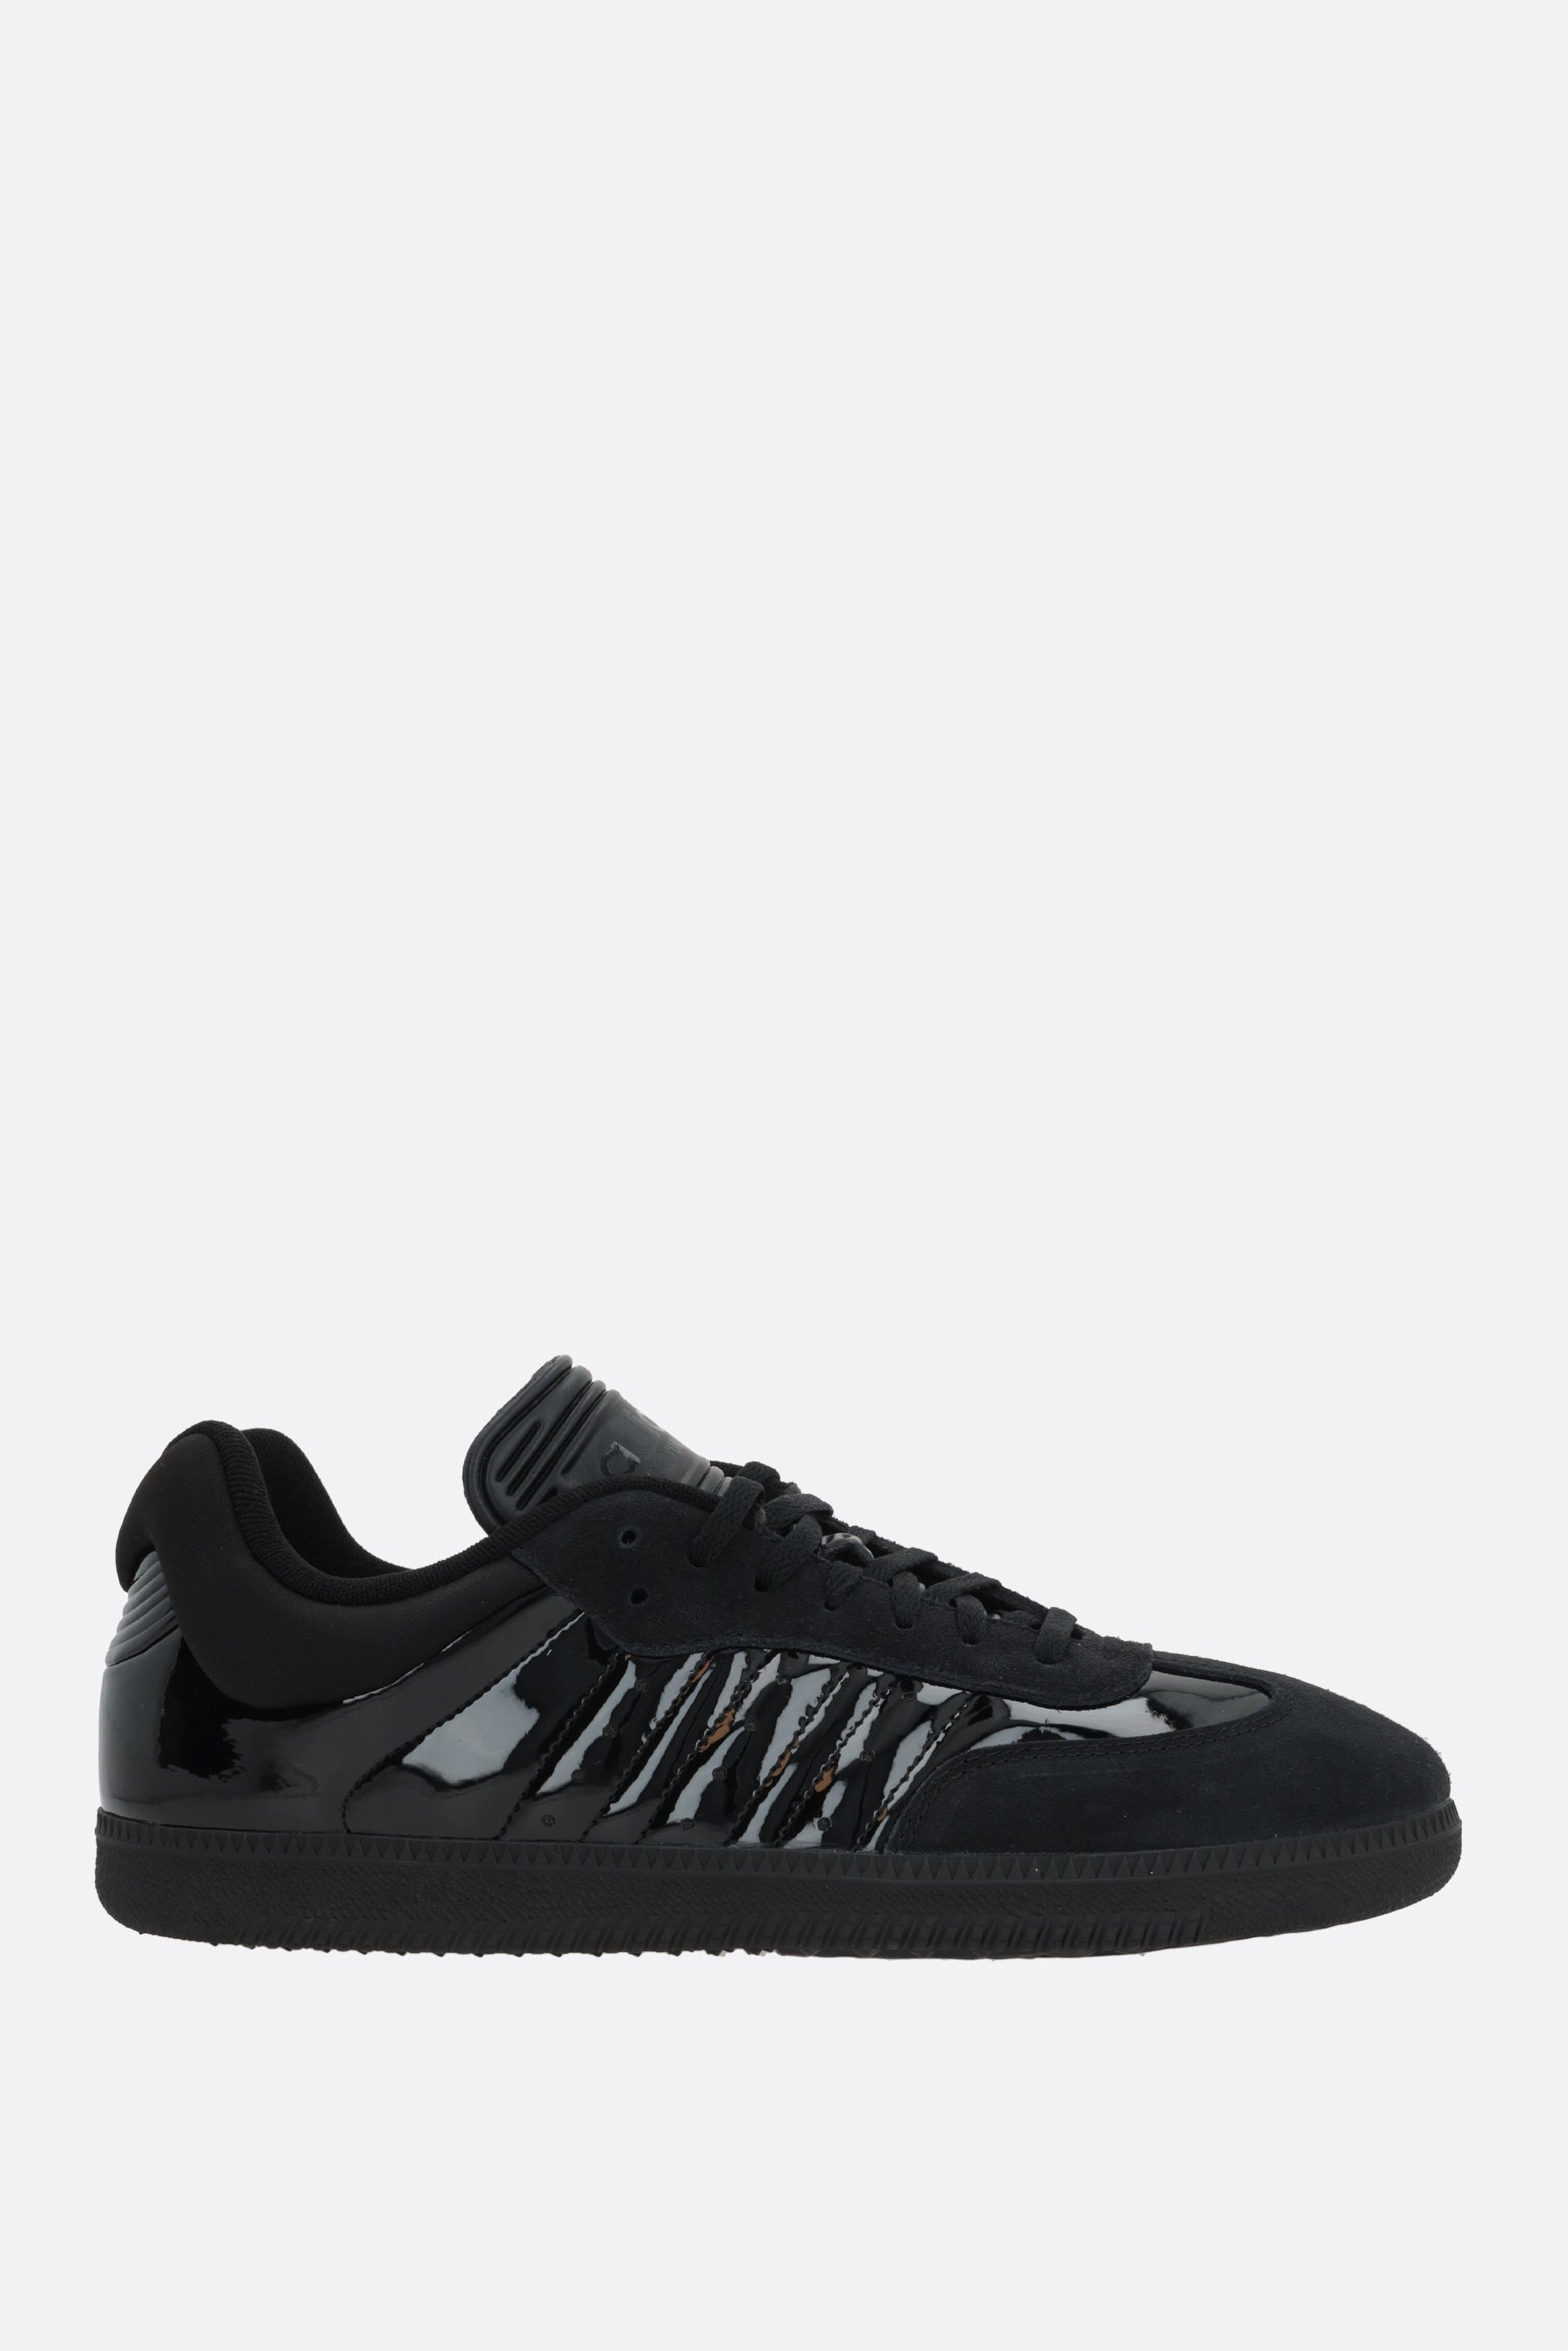 Samba Dingyun Zhang suede and patent leather sneakers